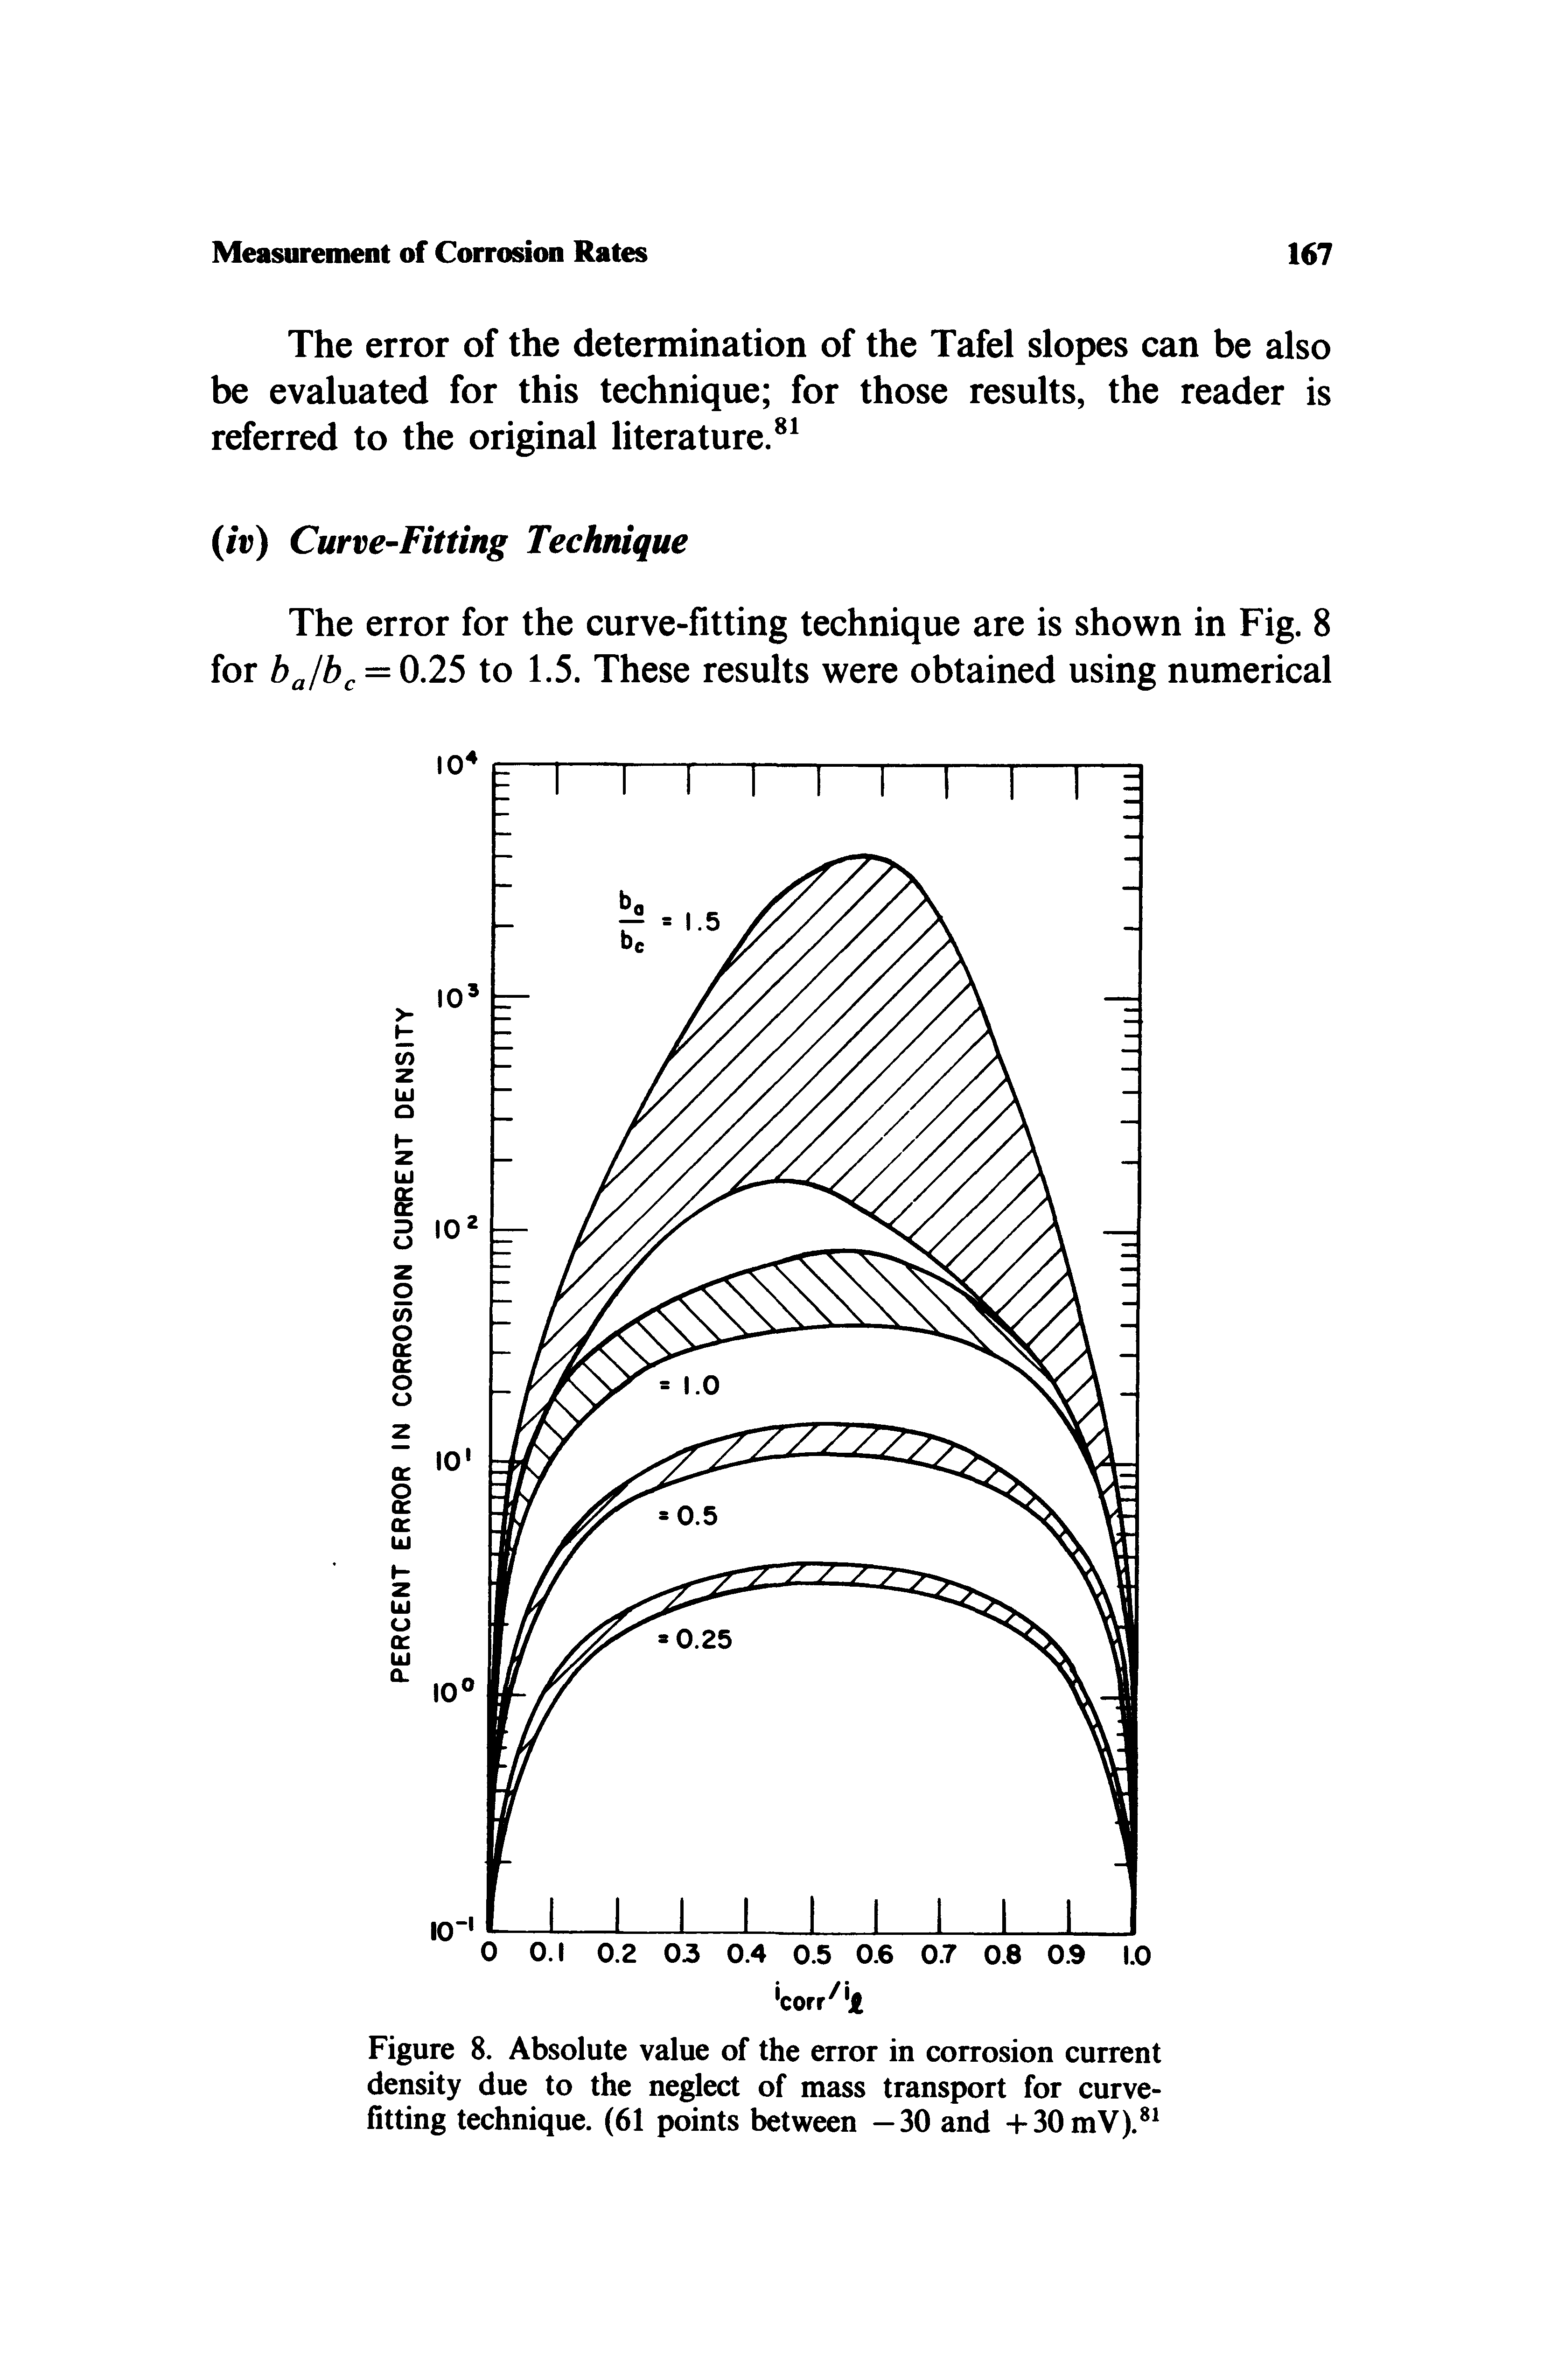 Figure 8. Absolute value of the error in corrosion current density due to the neglect of mass transport for curve-fitting technique. (61 points between -30 and -l-30mV). ...